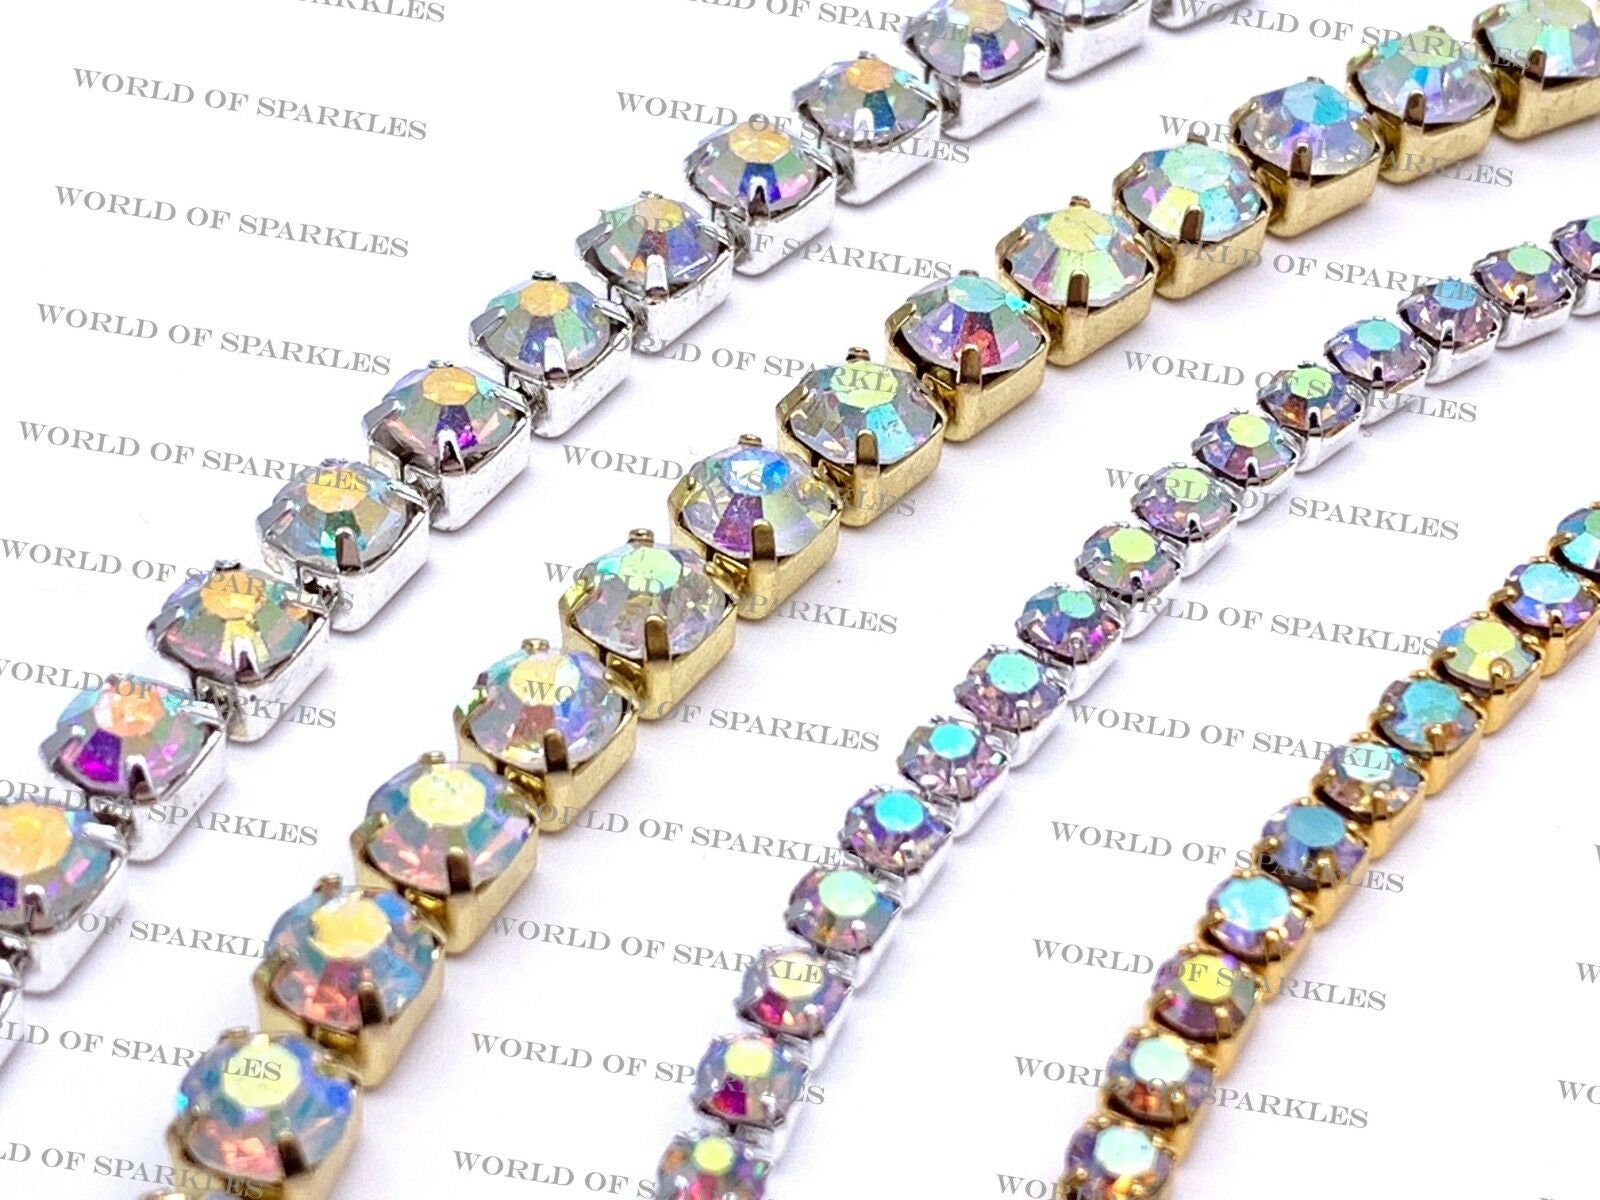  Rhinestone Chain Color AB SS12 for Sewing Decoration